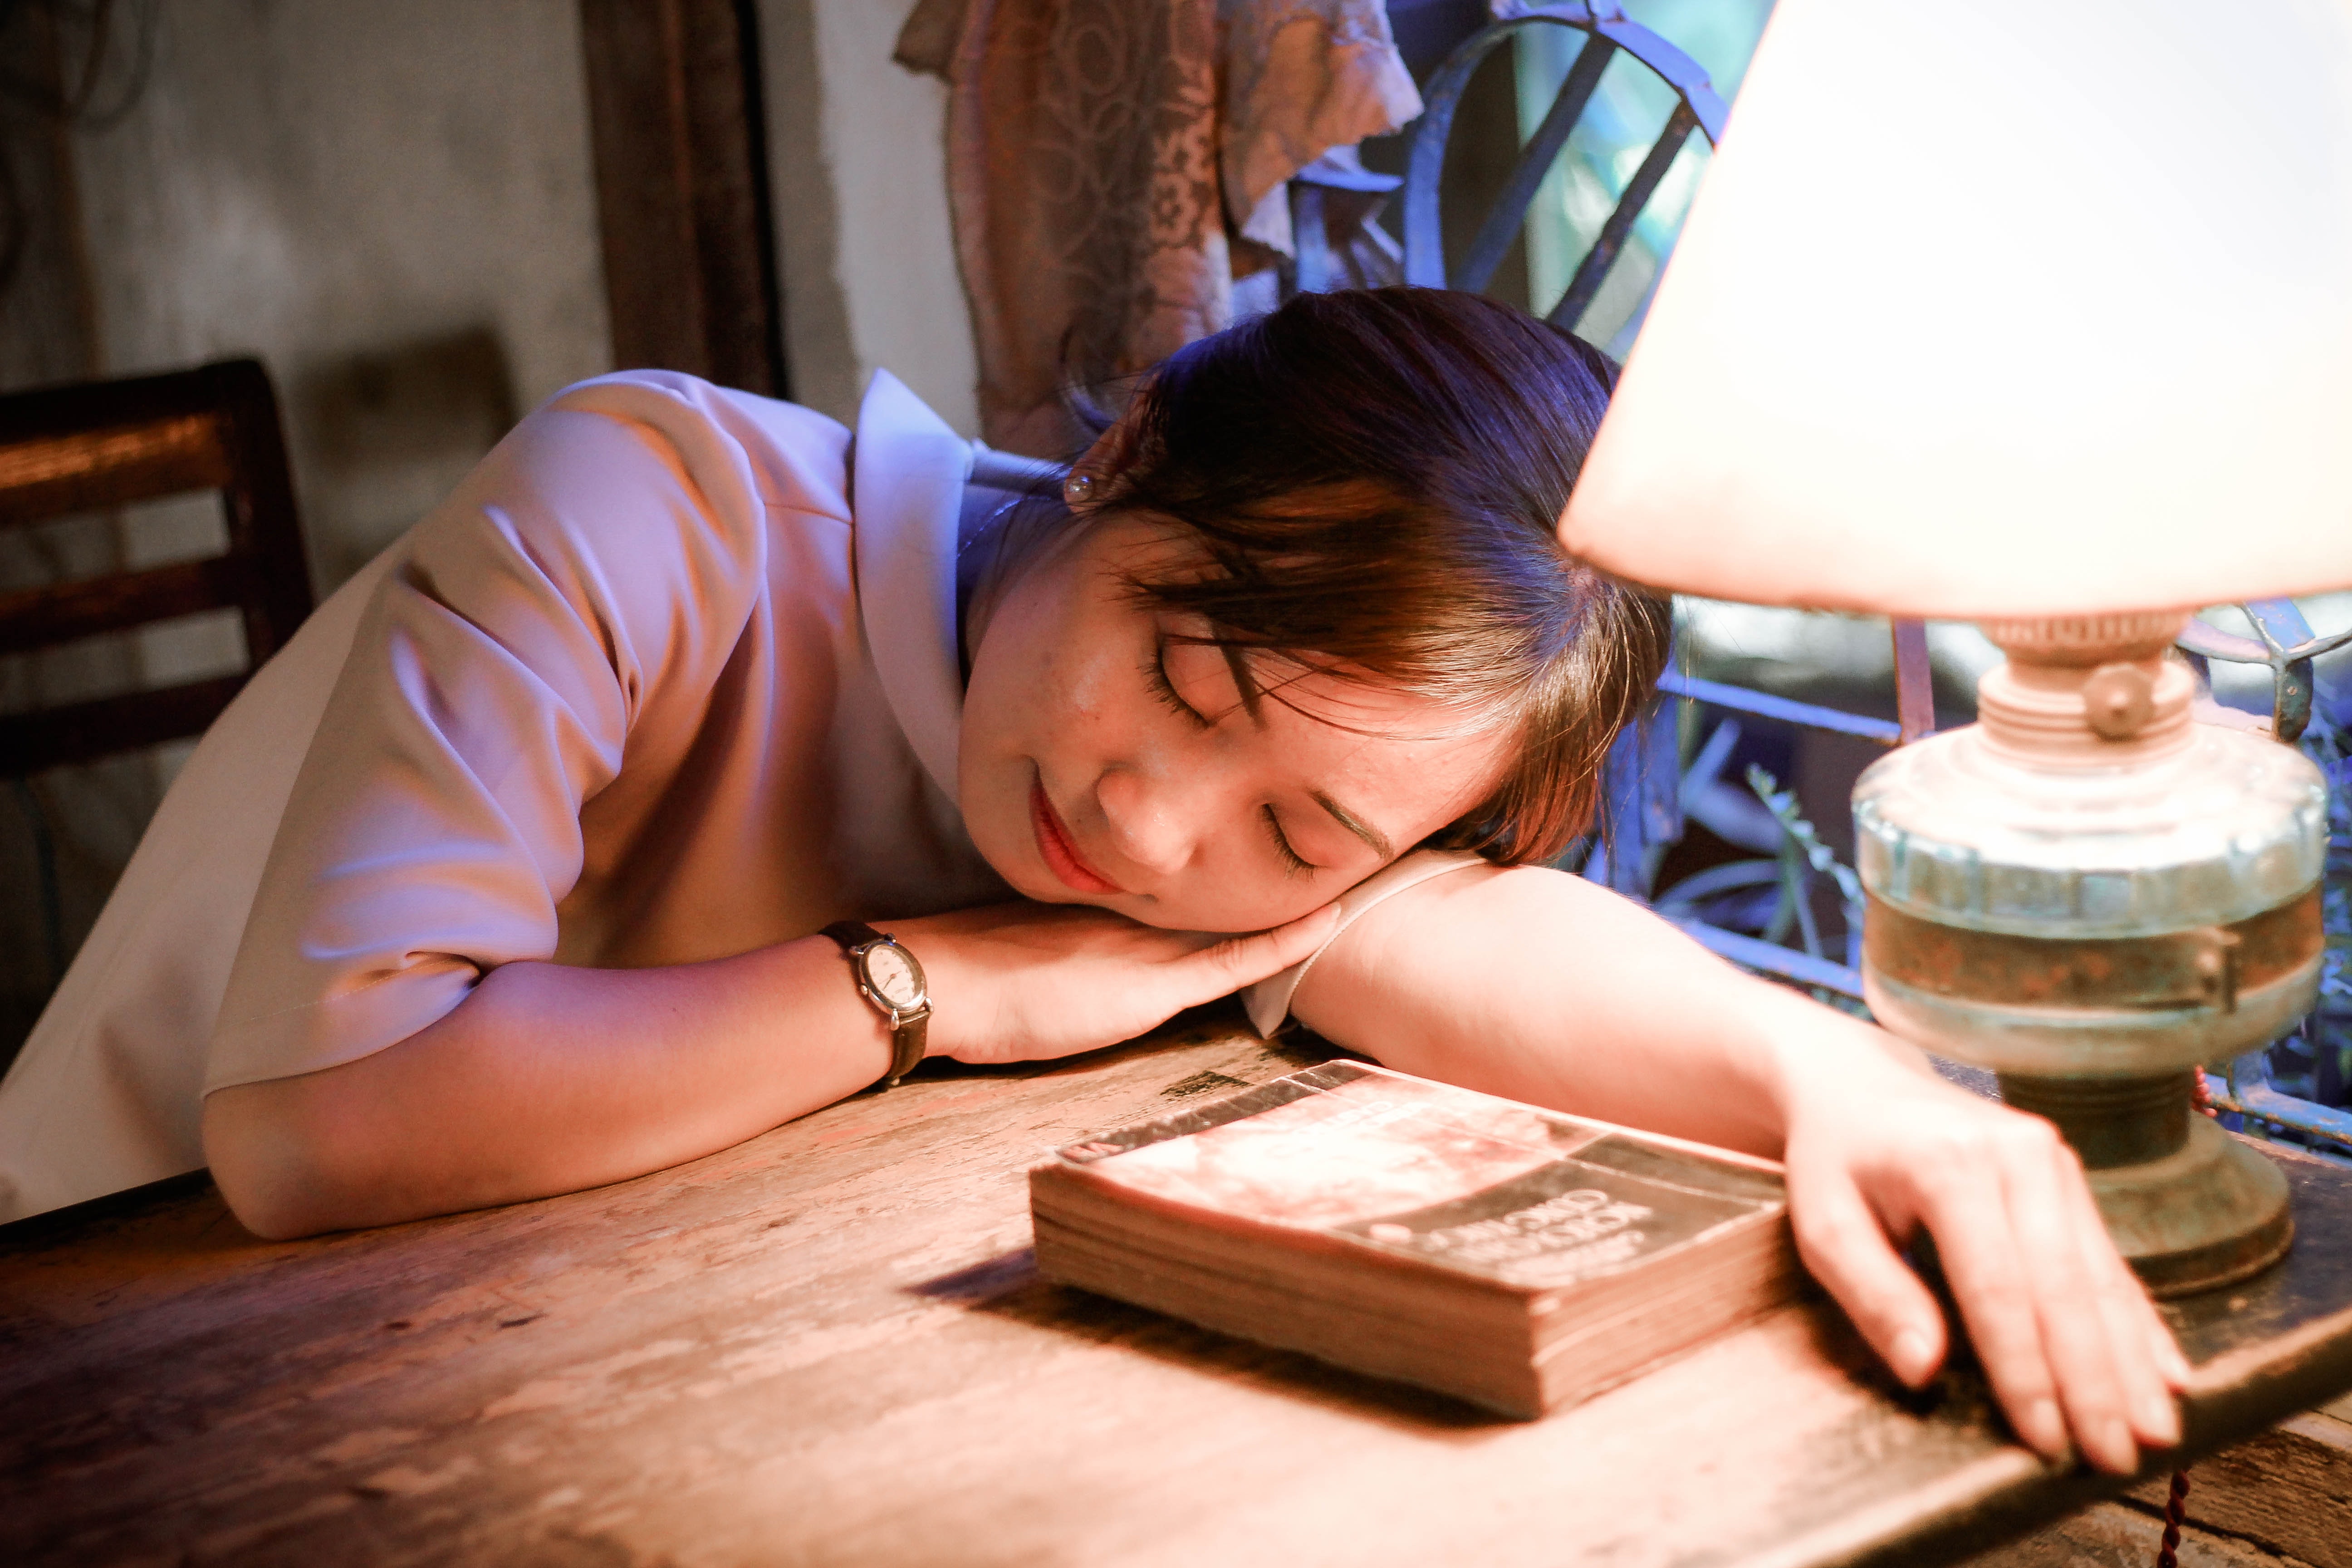 A young girl asleep with her head on a desk next to a book.